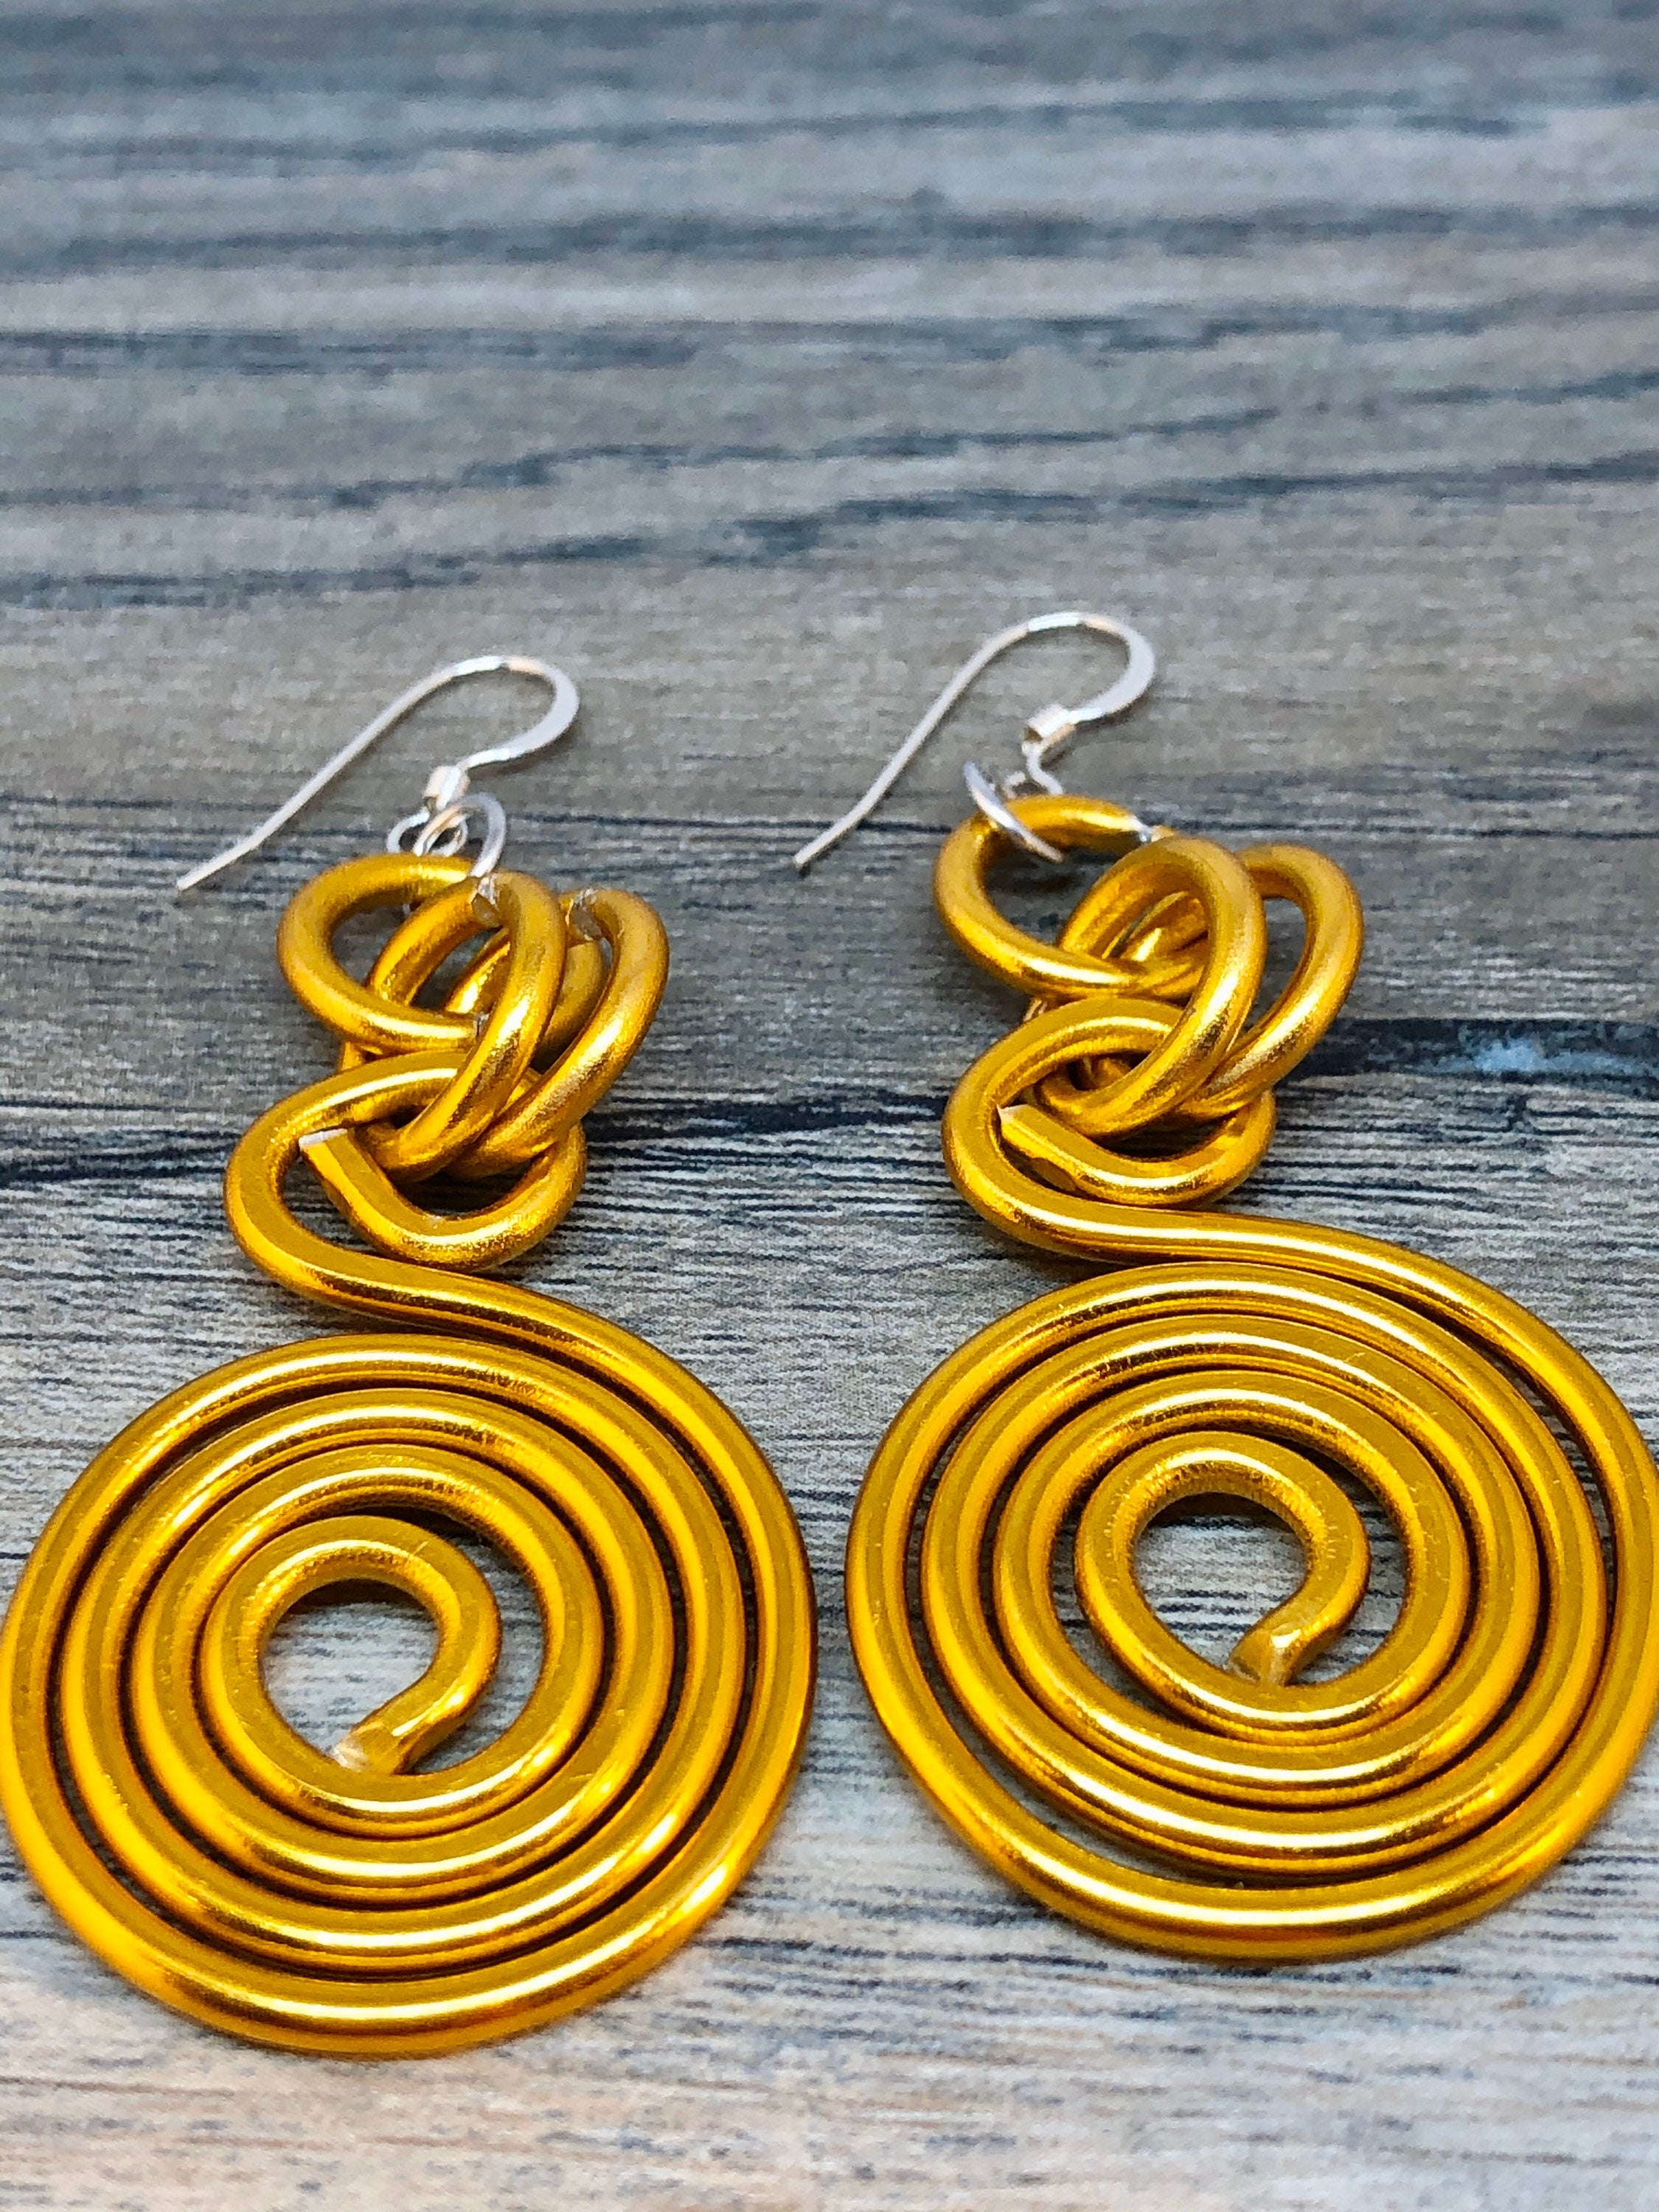 Gold Aluminum Wire Earrings, Circle light weight handmade earrings with sterling silver ear wire